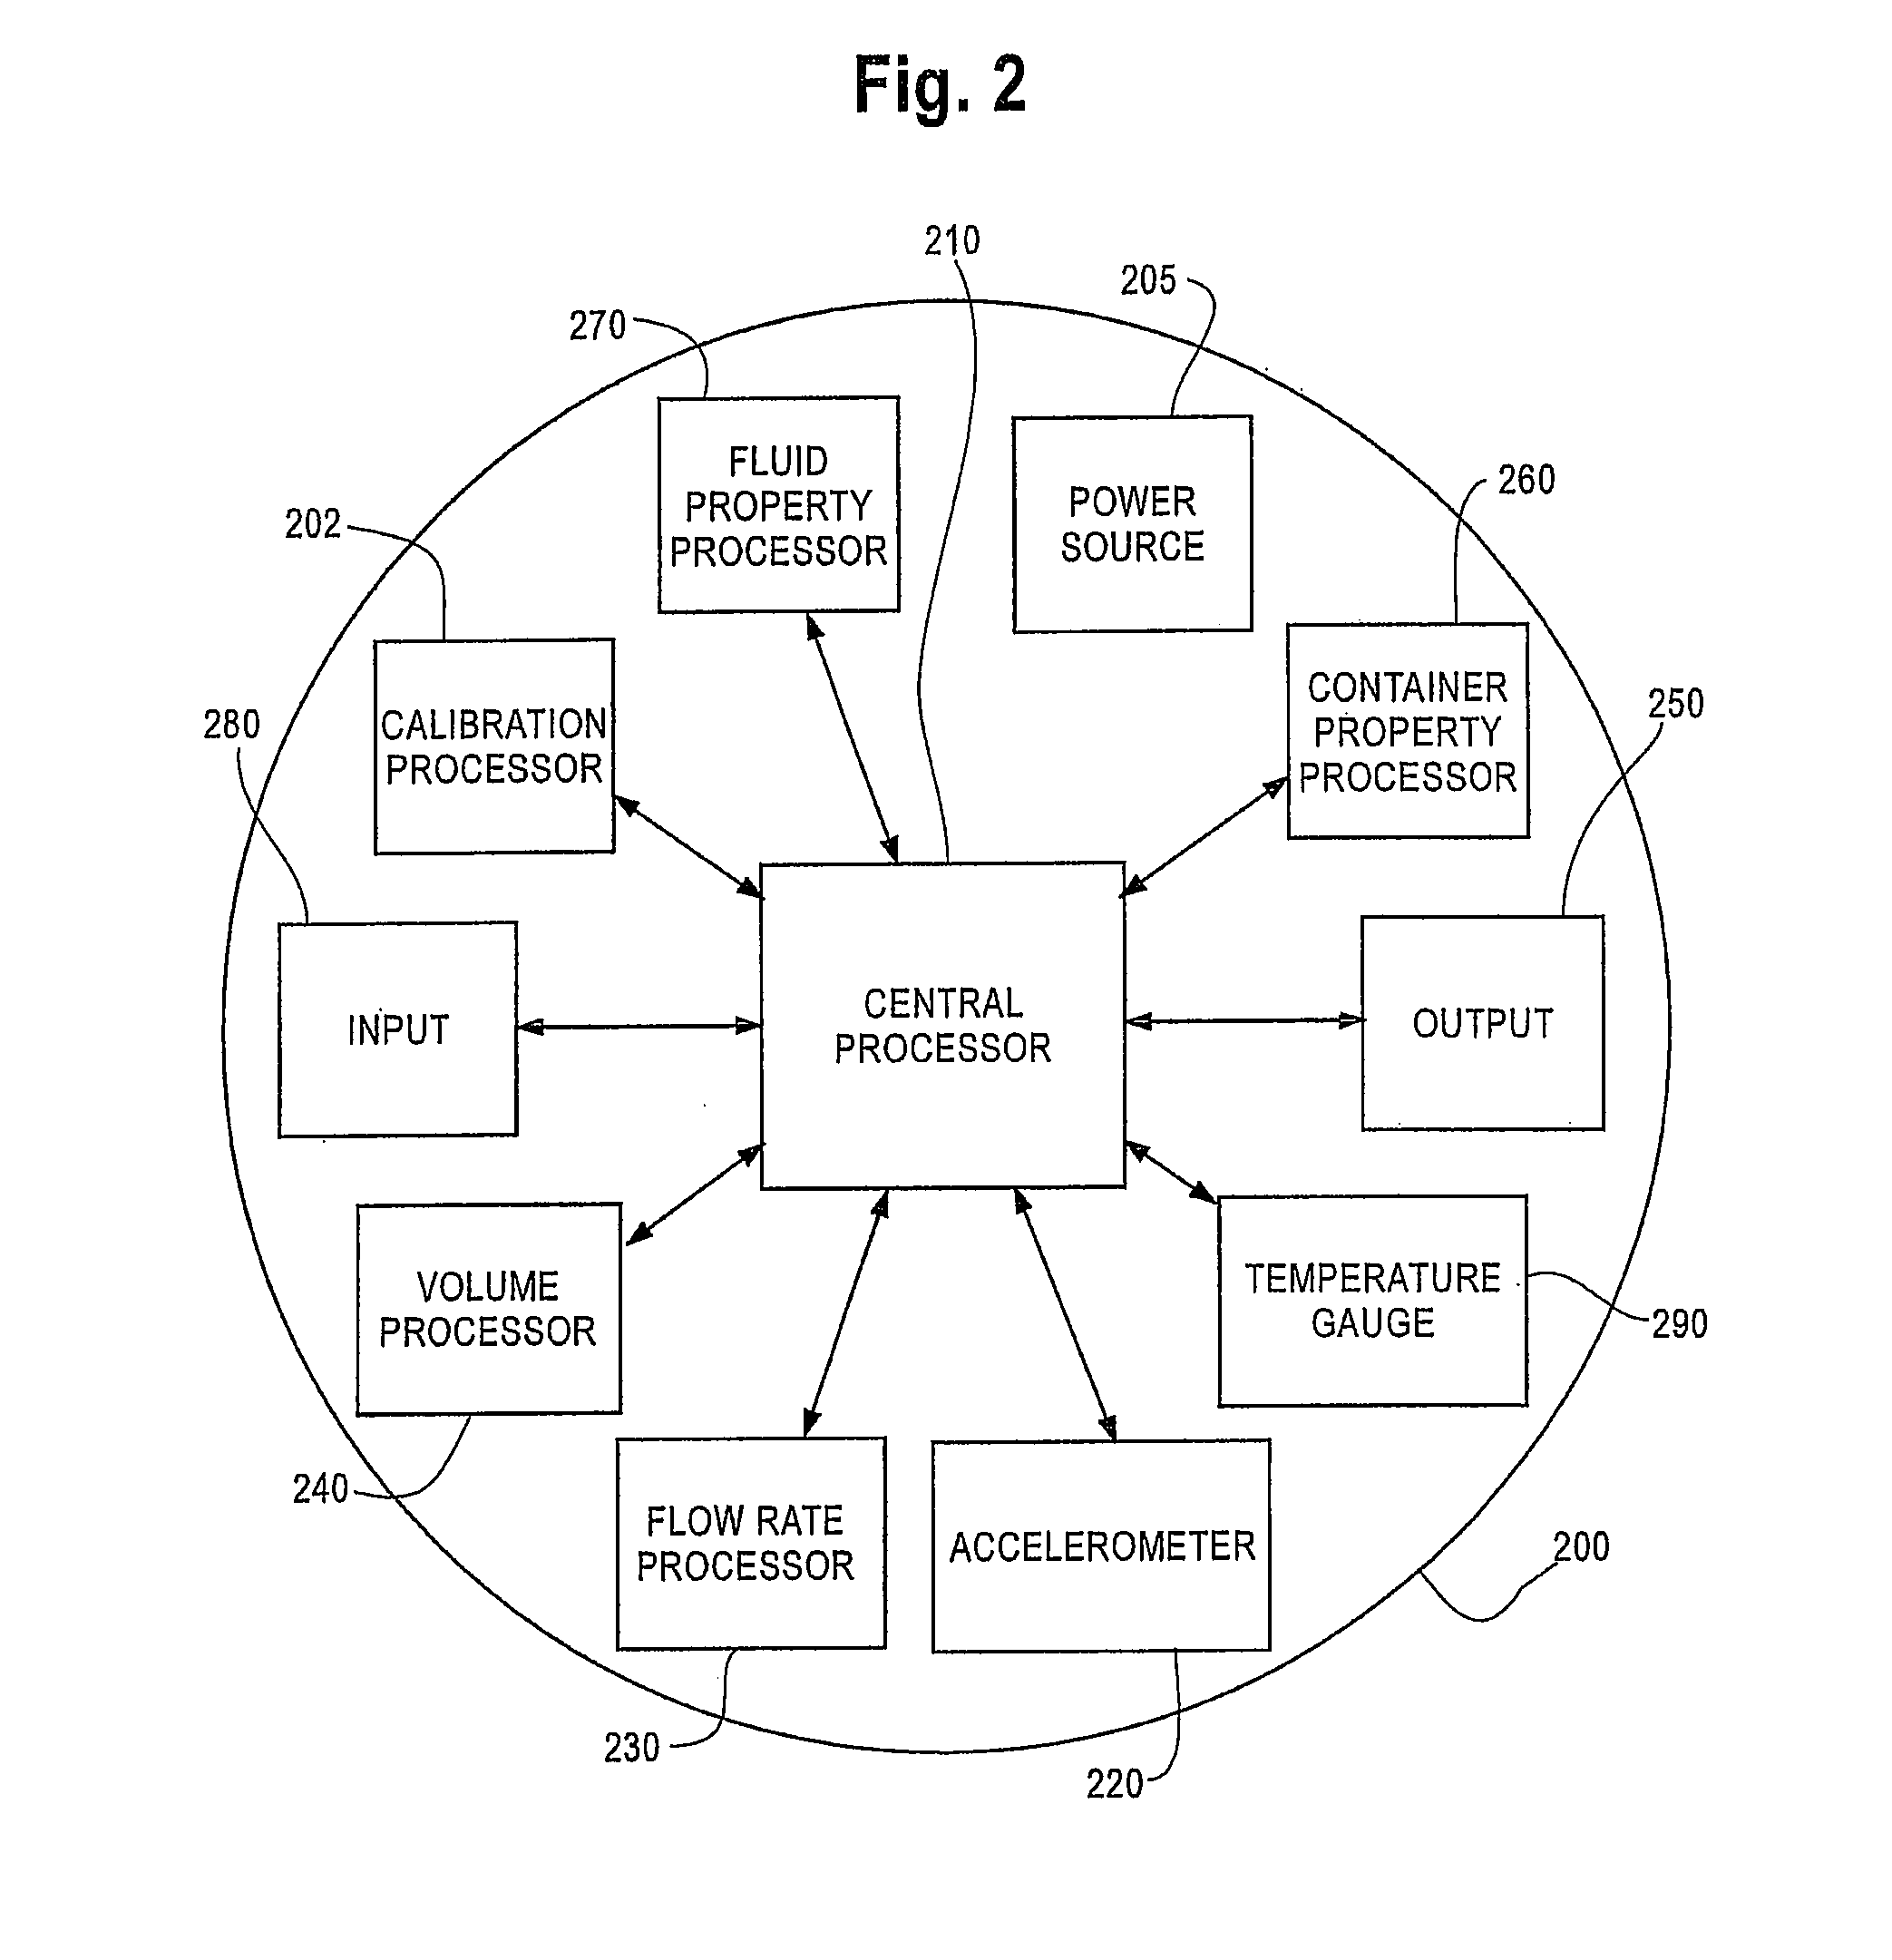 Apparatus and methods for monitoring quantities of fluid in a container